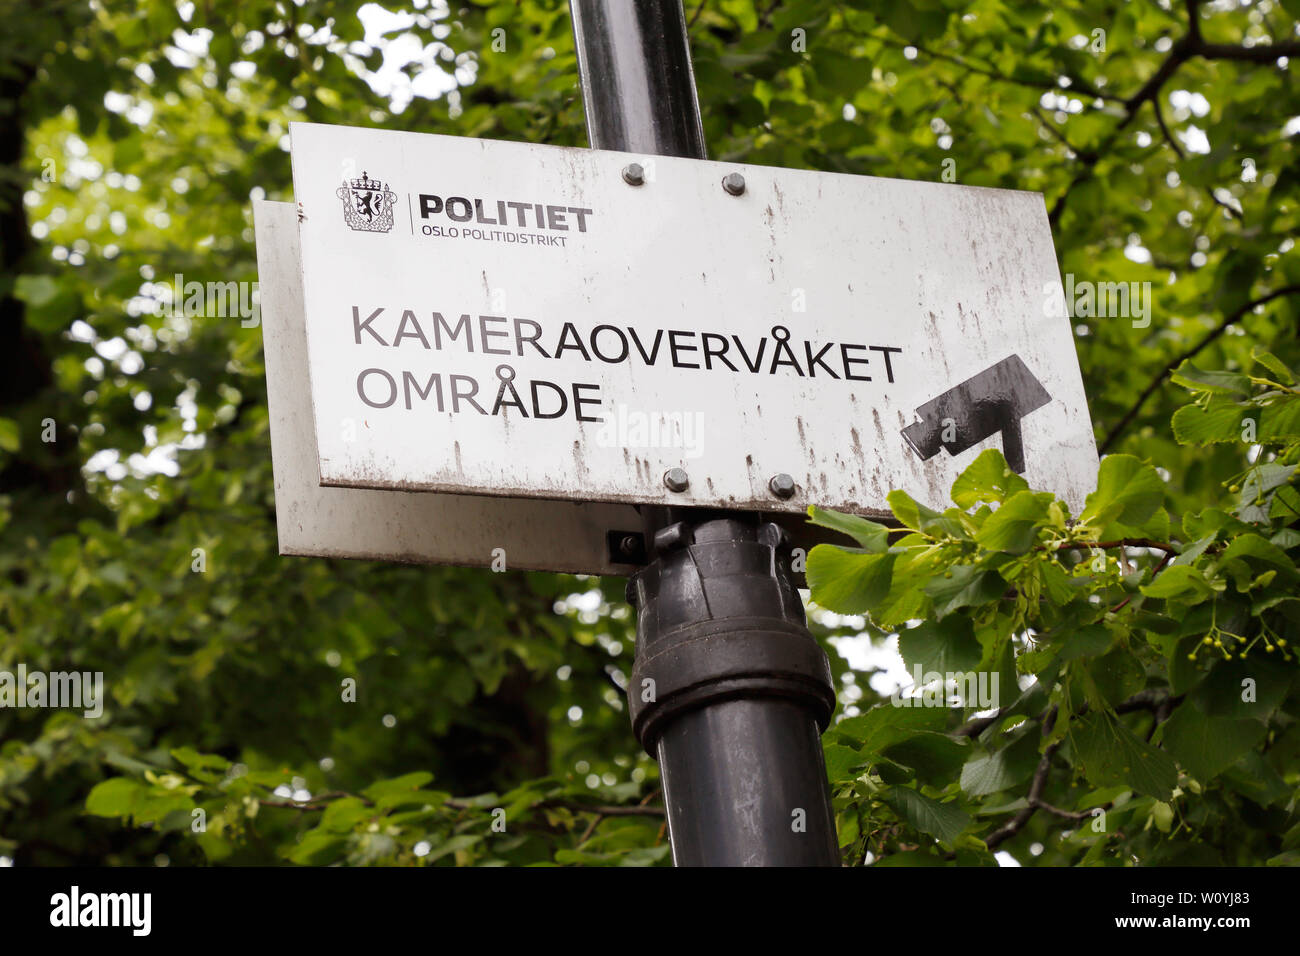 Oslo, Norway - June 20, 2019: Sign in Norwegian with information near the National thatre are camera-monitored area by the police department. Stock Photo